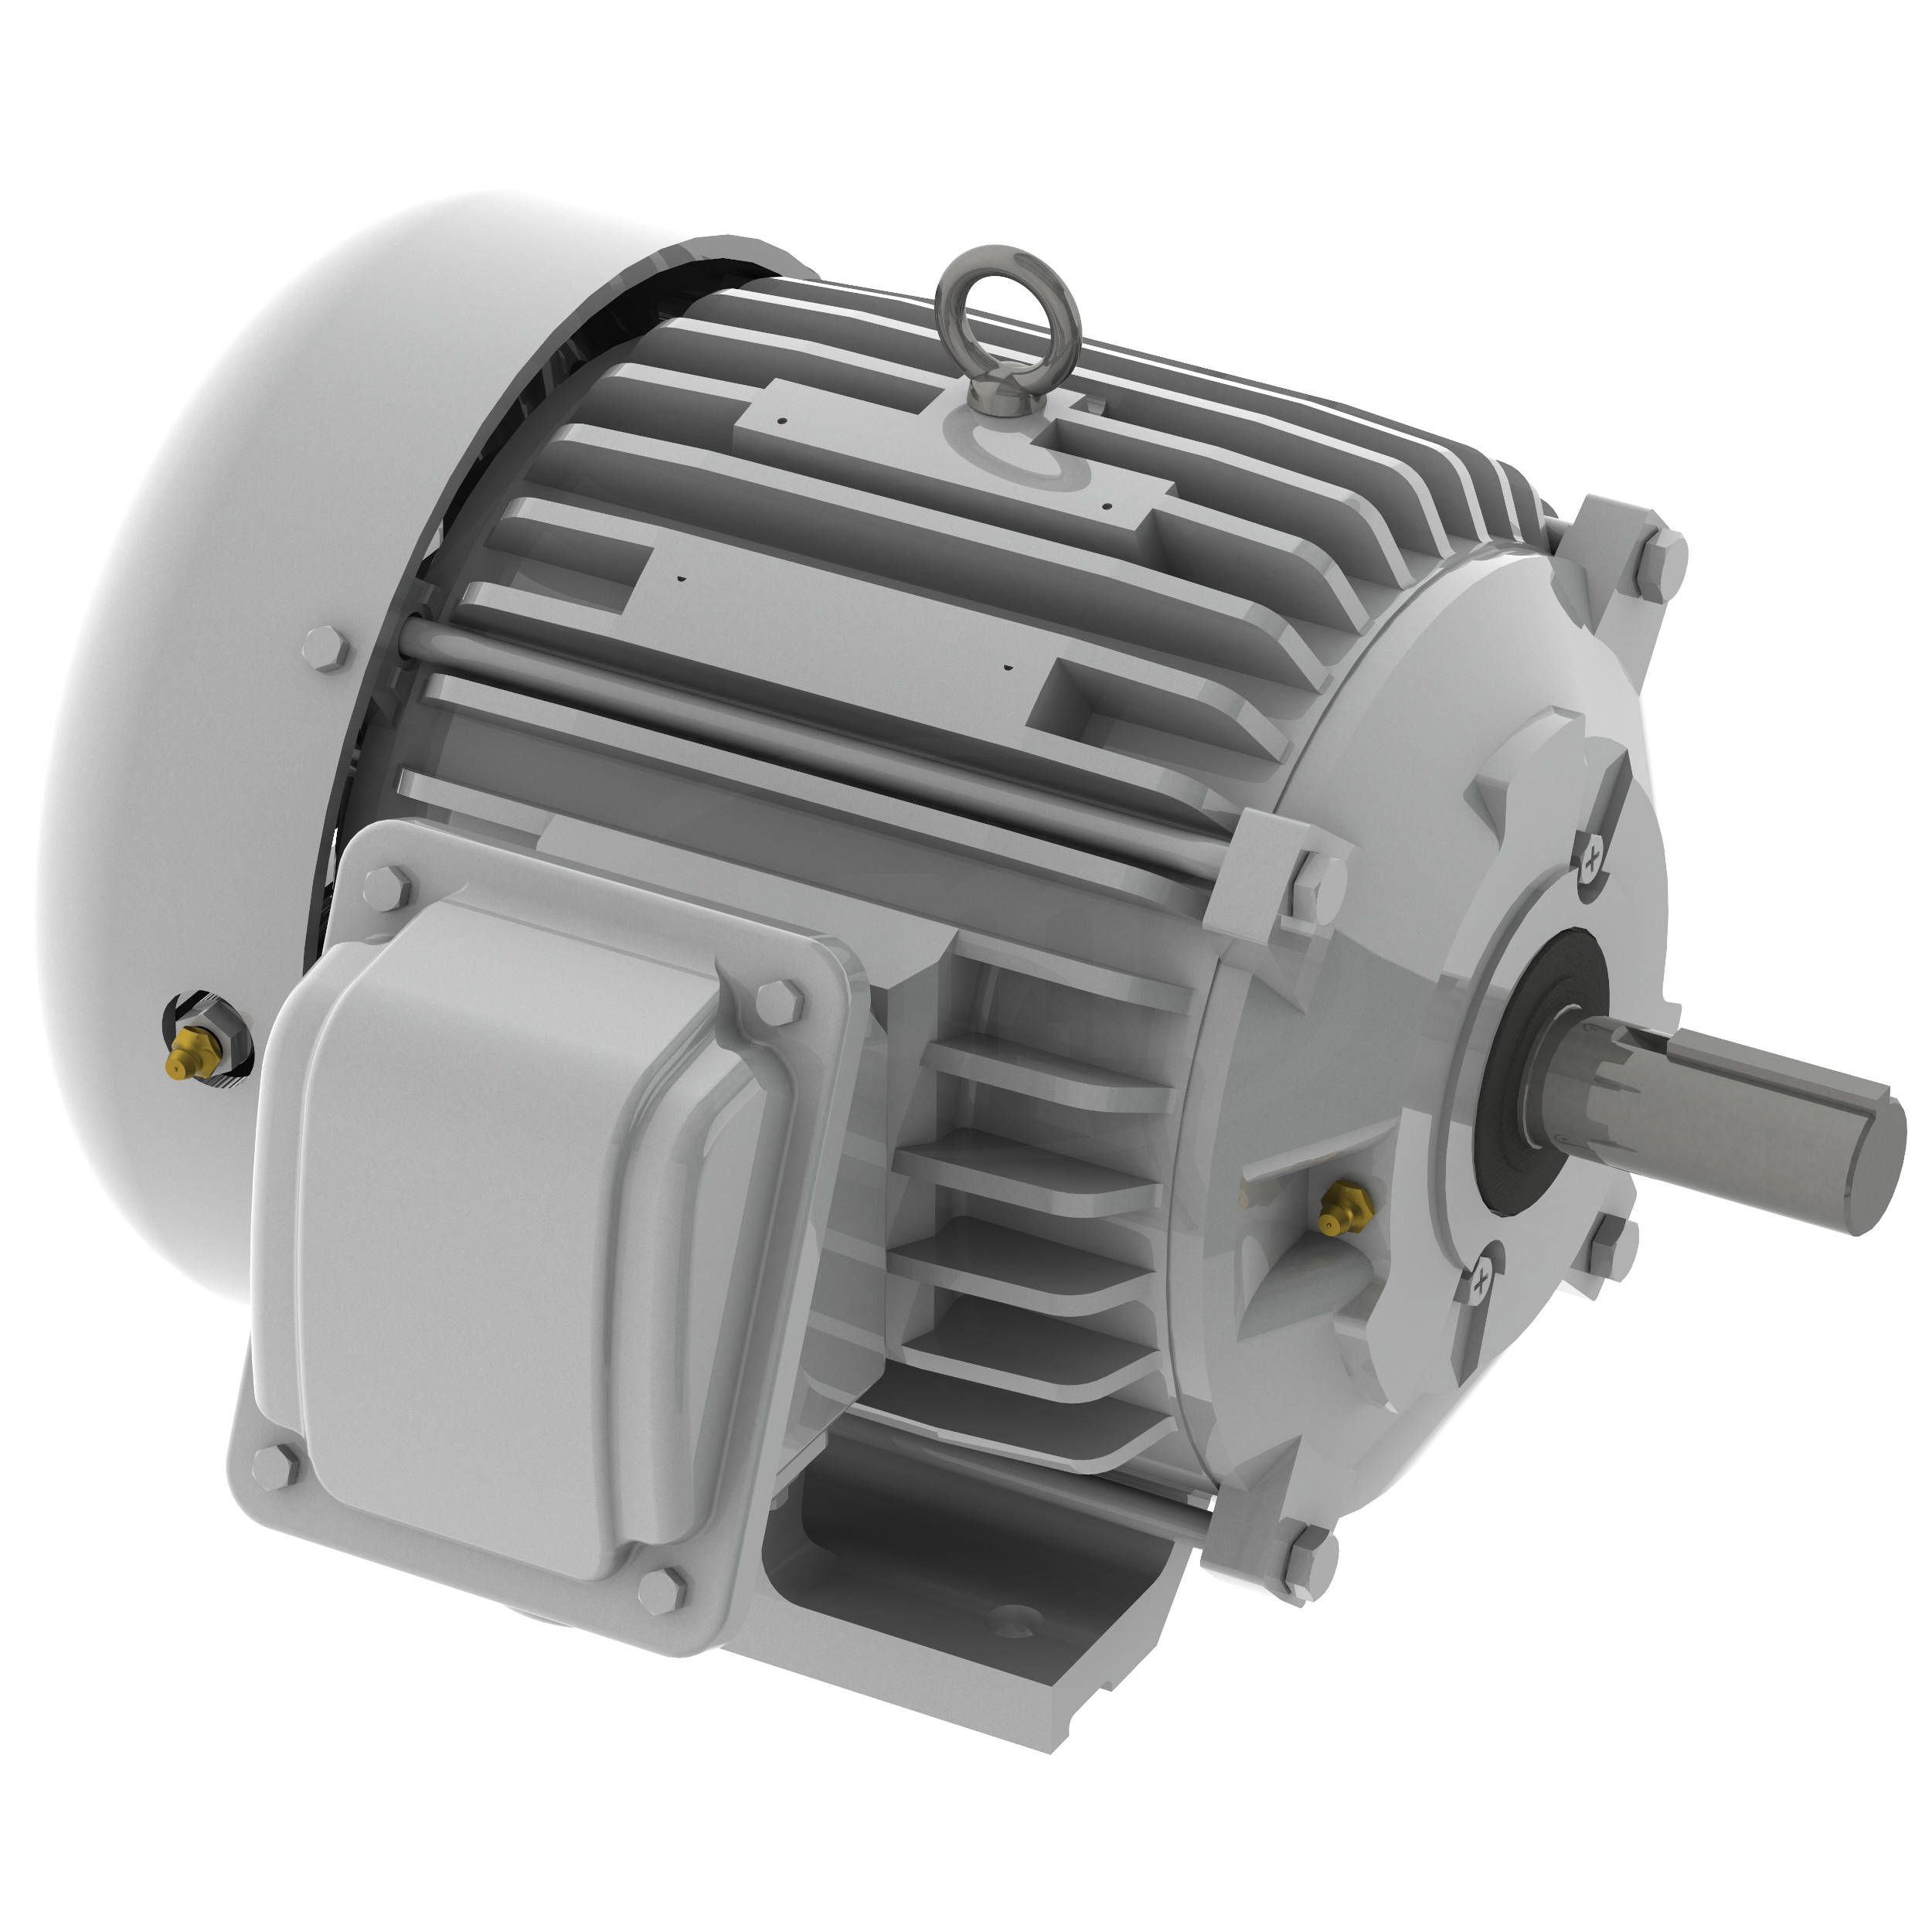 New Electric Motor 1.5 HP 3 Phase Premium Efficient 1200 RPM 182T Frame 